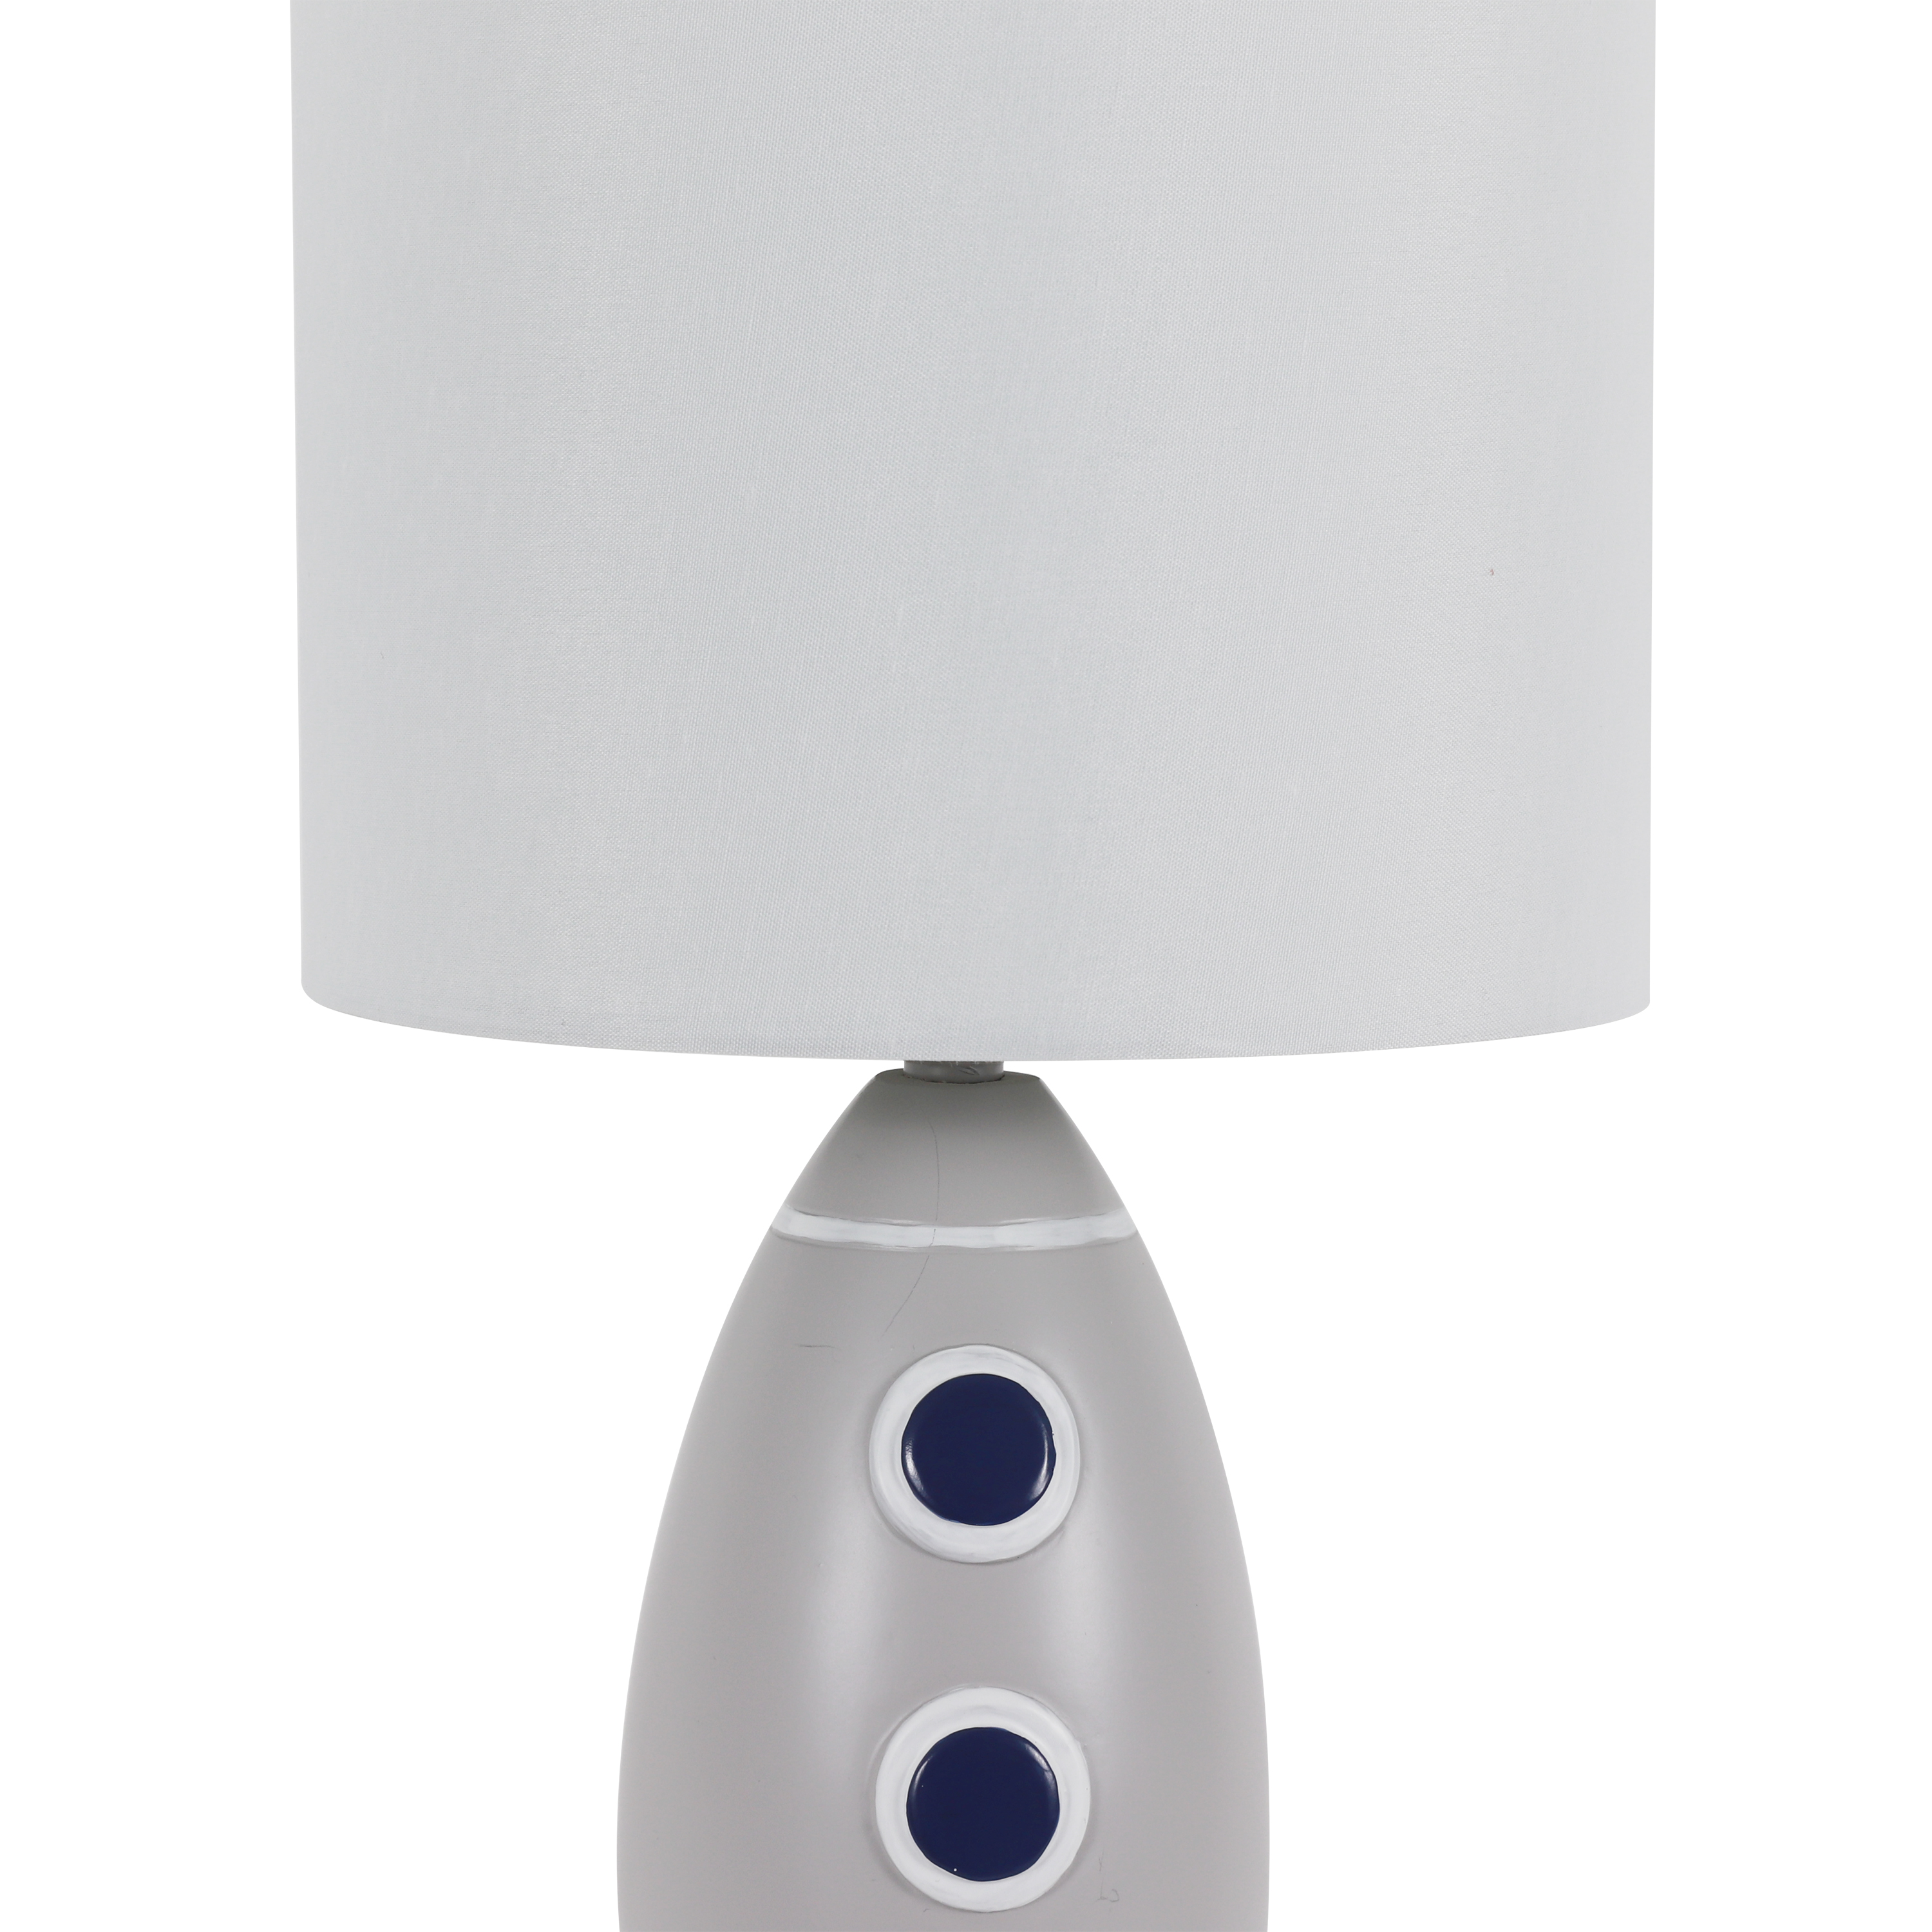 Kids Rocket Table Lamp, Gray Finish, Your Zone - image 3 of 10